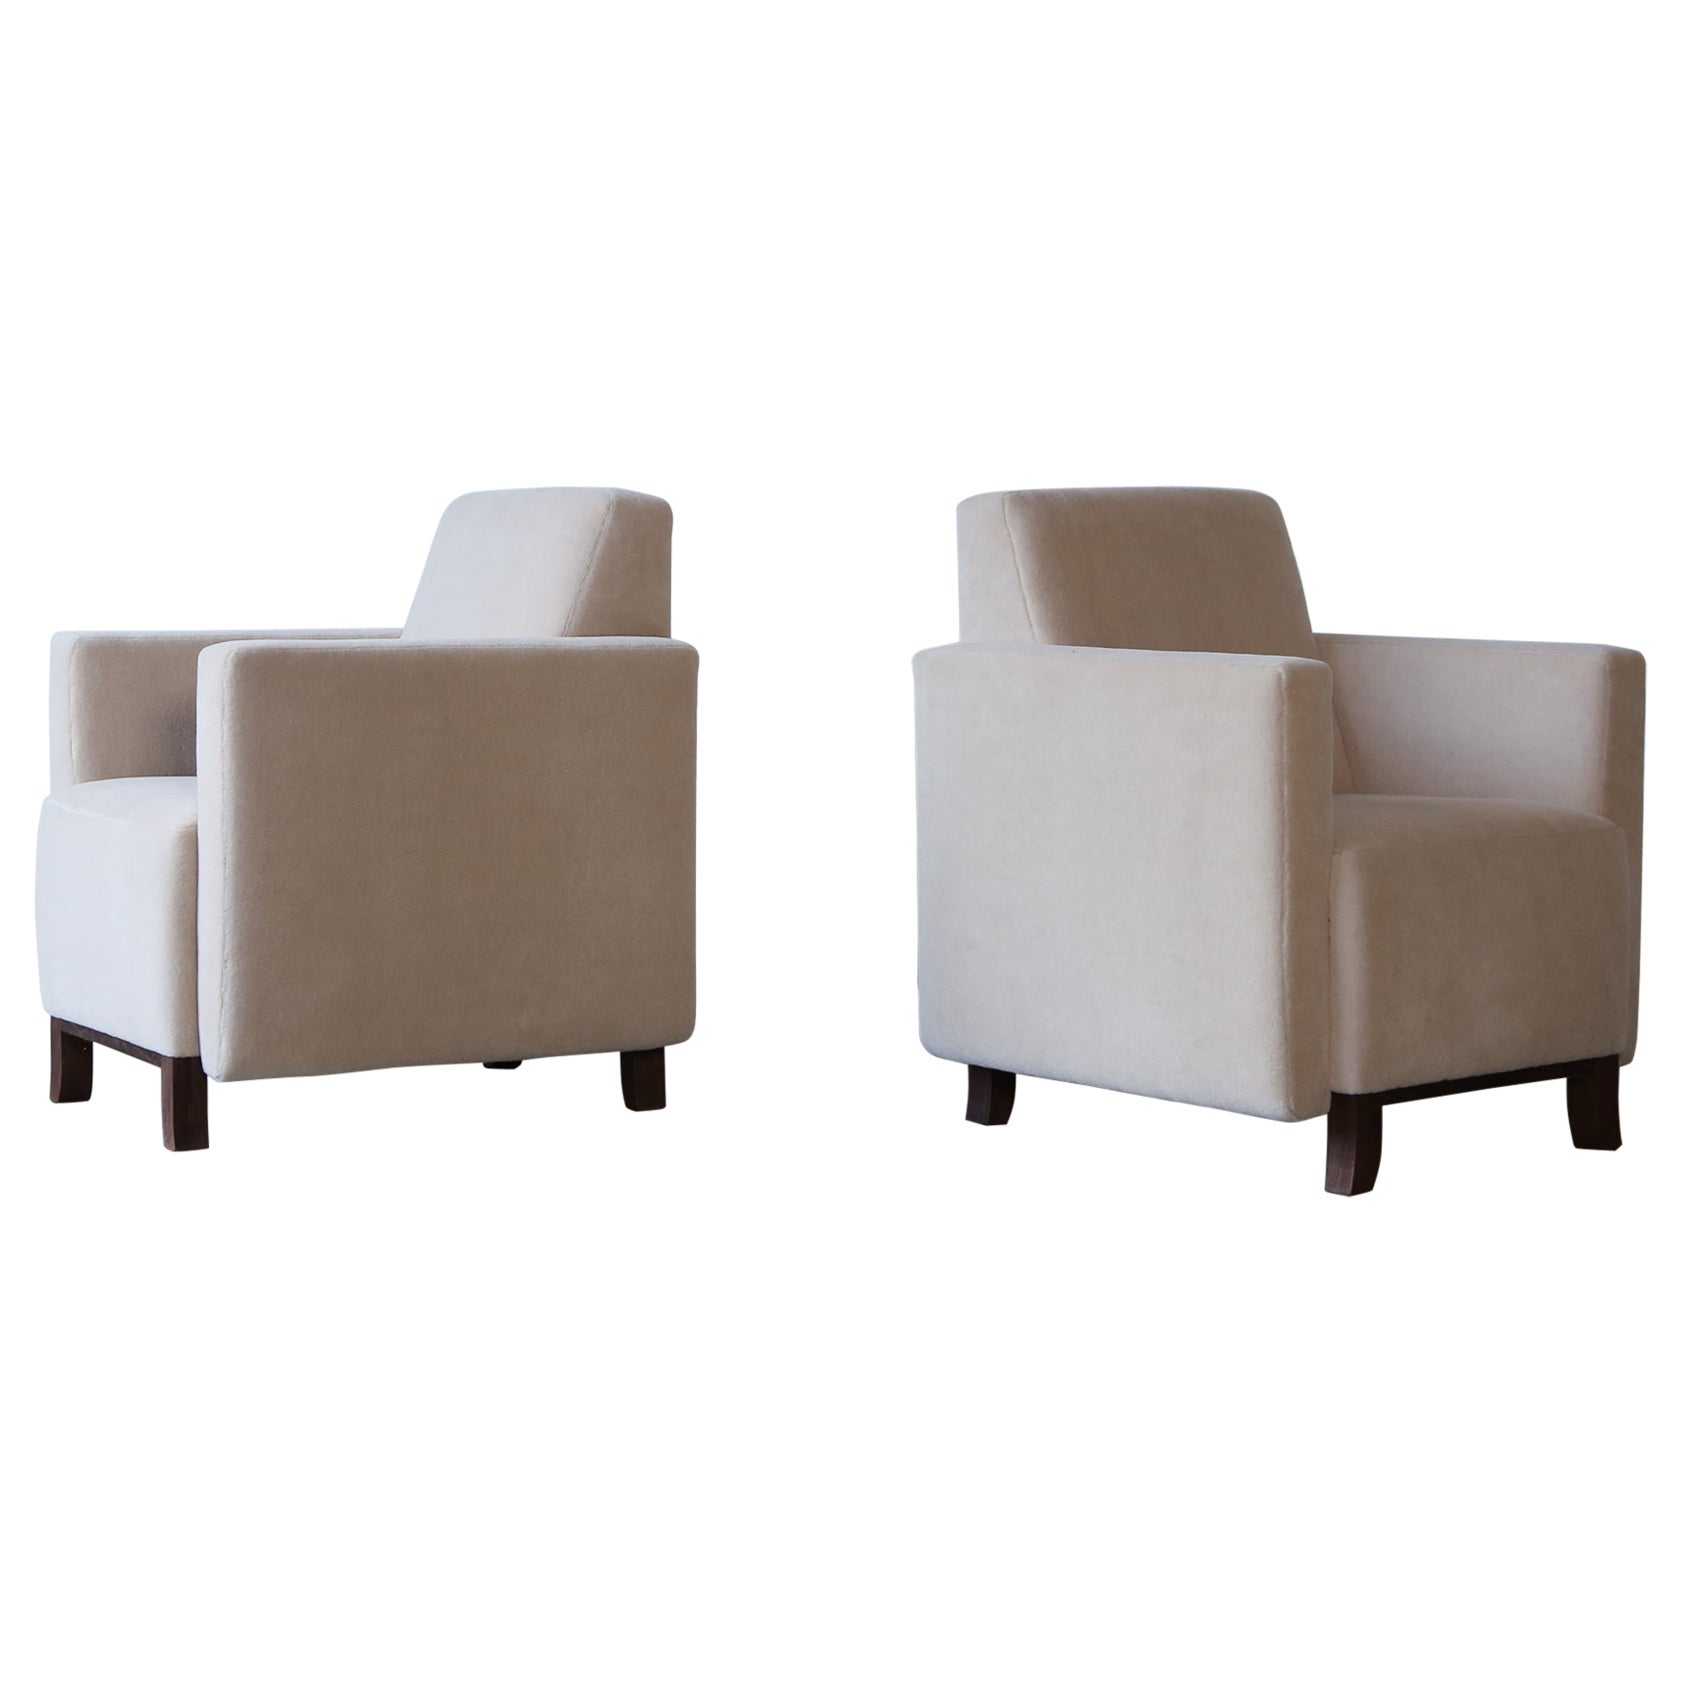 Pair of Square Armed Club / Lounge Chairs, Upholstered in Pure Alpaca